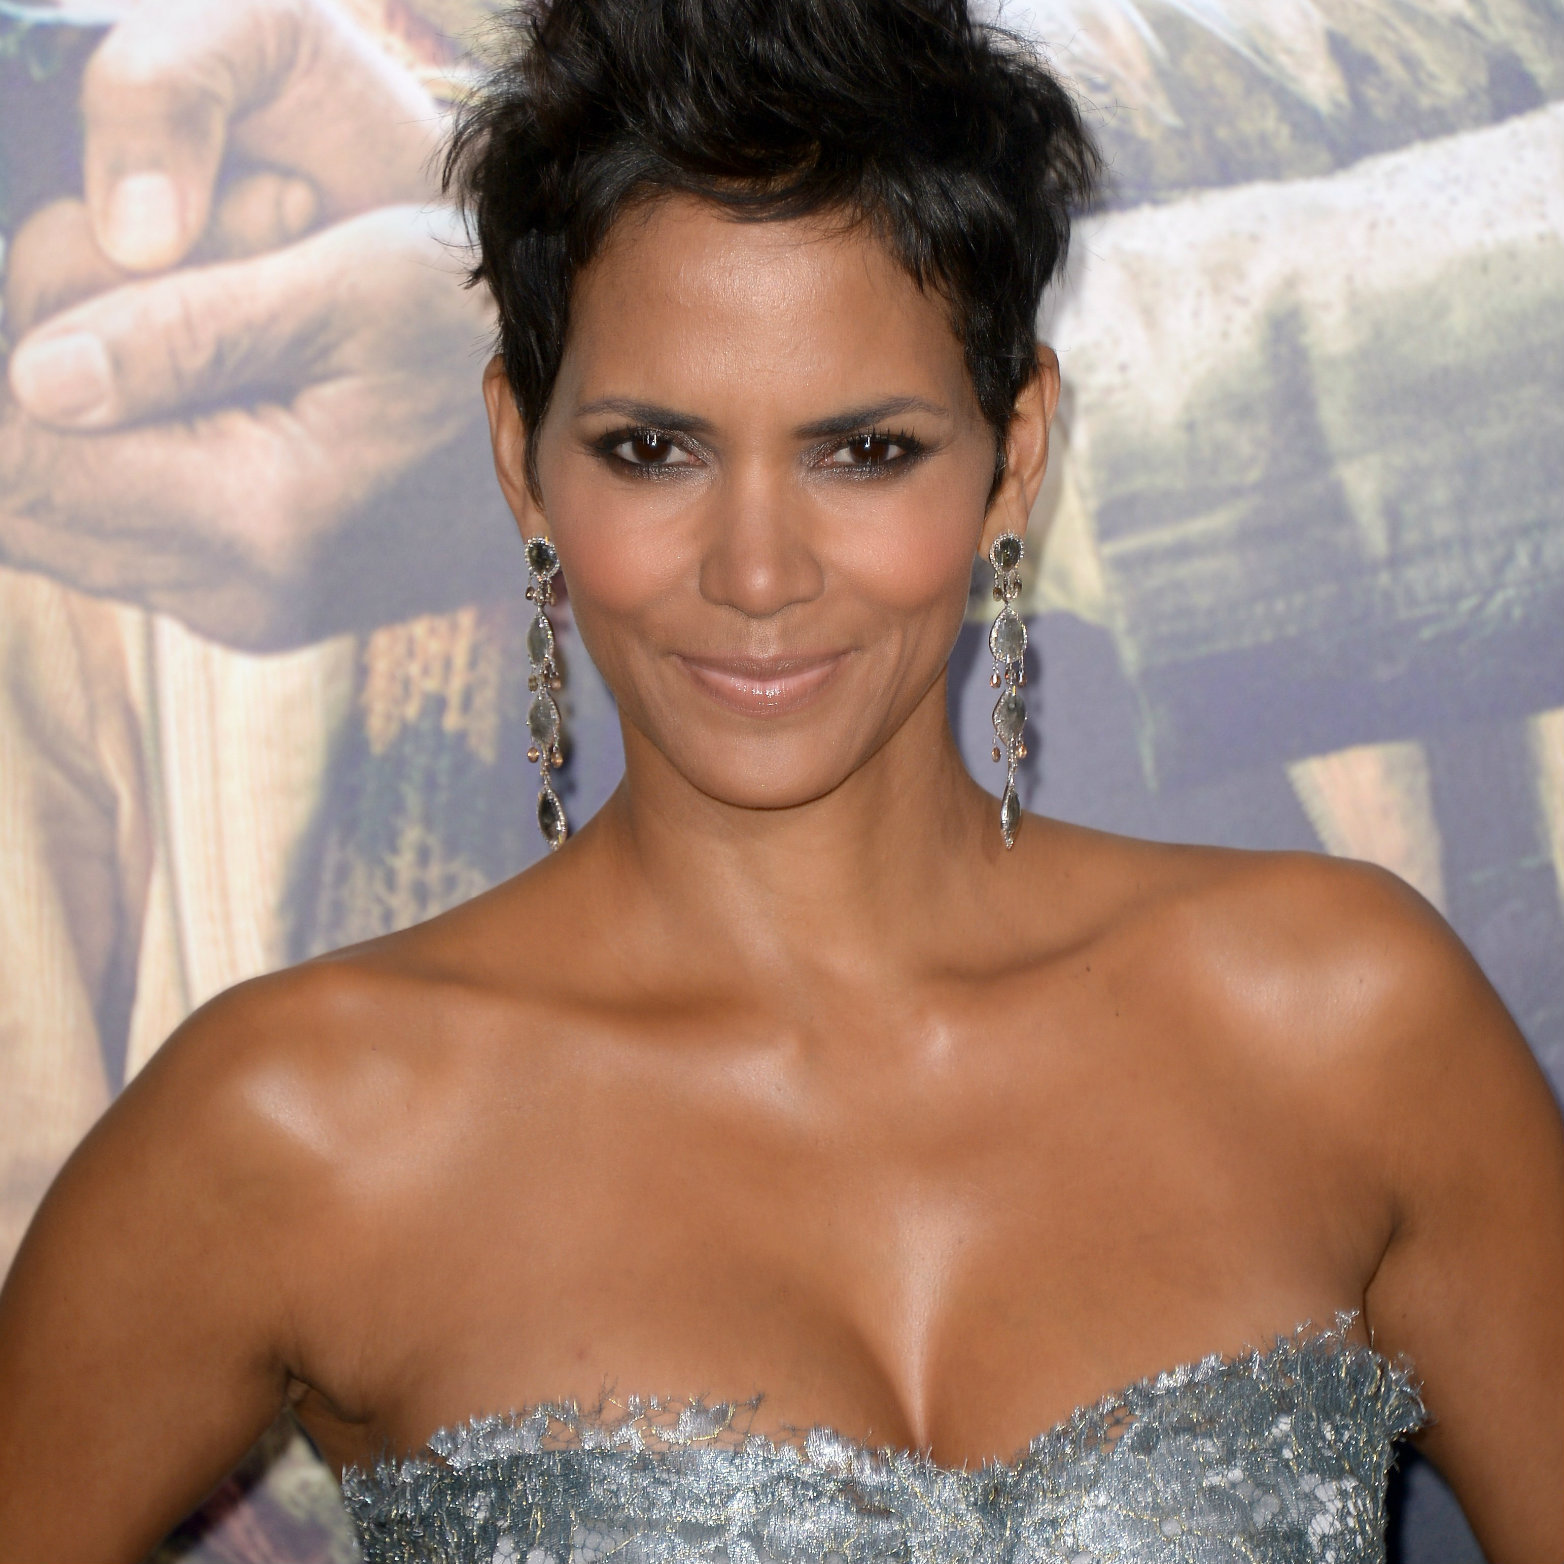 Halle Berry smashed into another woman's car, nearly killing her, and immediately took off from the scene. Luckily witnesses called 911 and the victim survived, but during court, was "livid" Berry denied much and got no jail time.